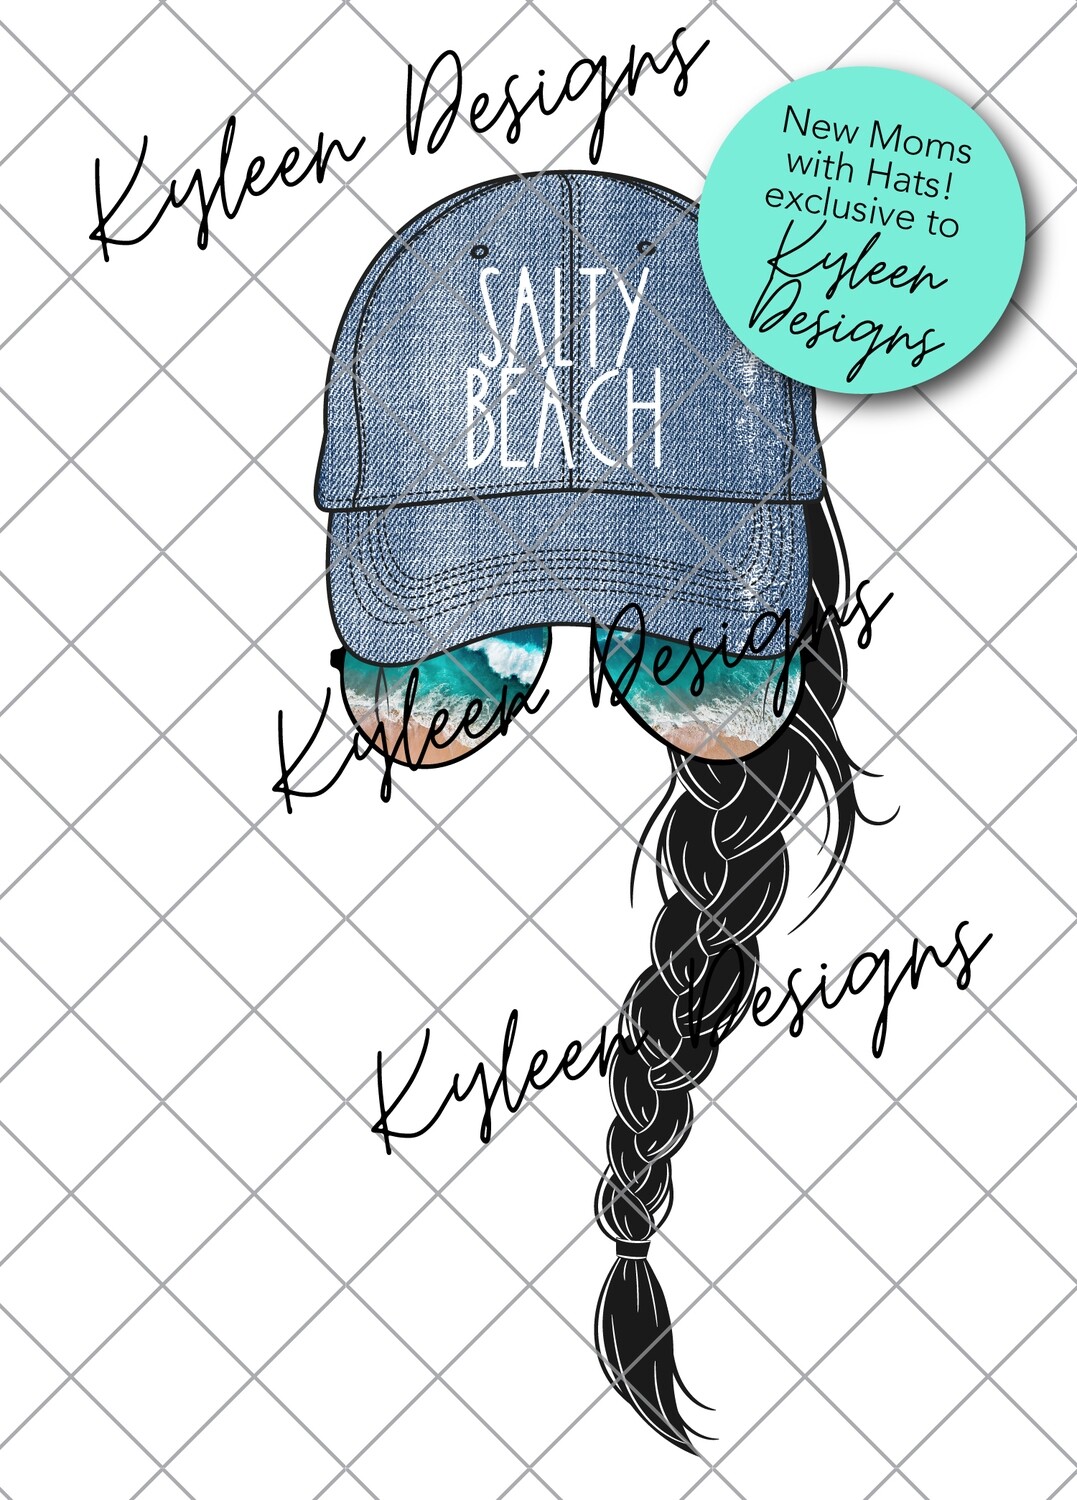 Mom braid with hat- salty beach 300 dpi PNG high res digital file.